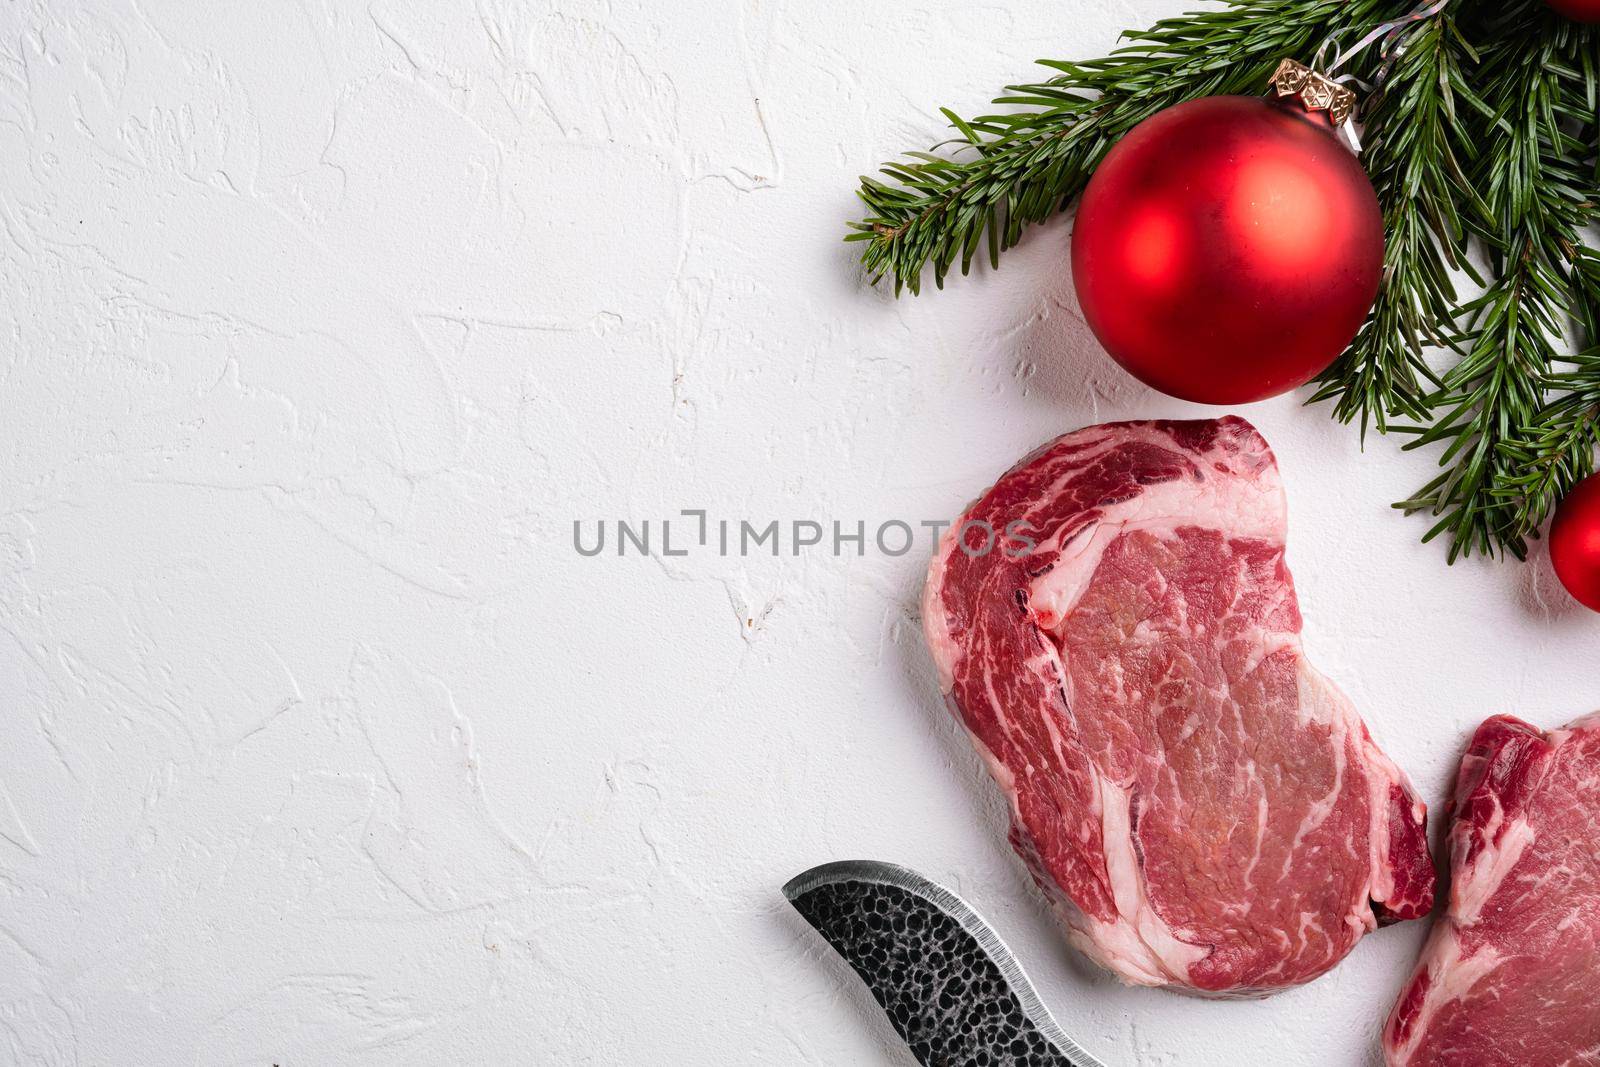 Rib eye steak new year, on white stone table background, top view flat lay, with copy space for text by Ilianesolenyi